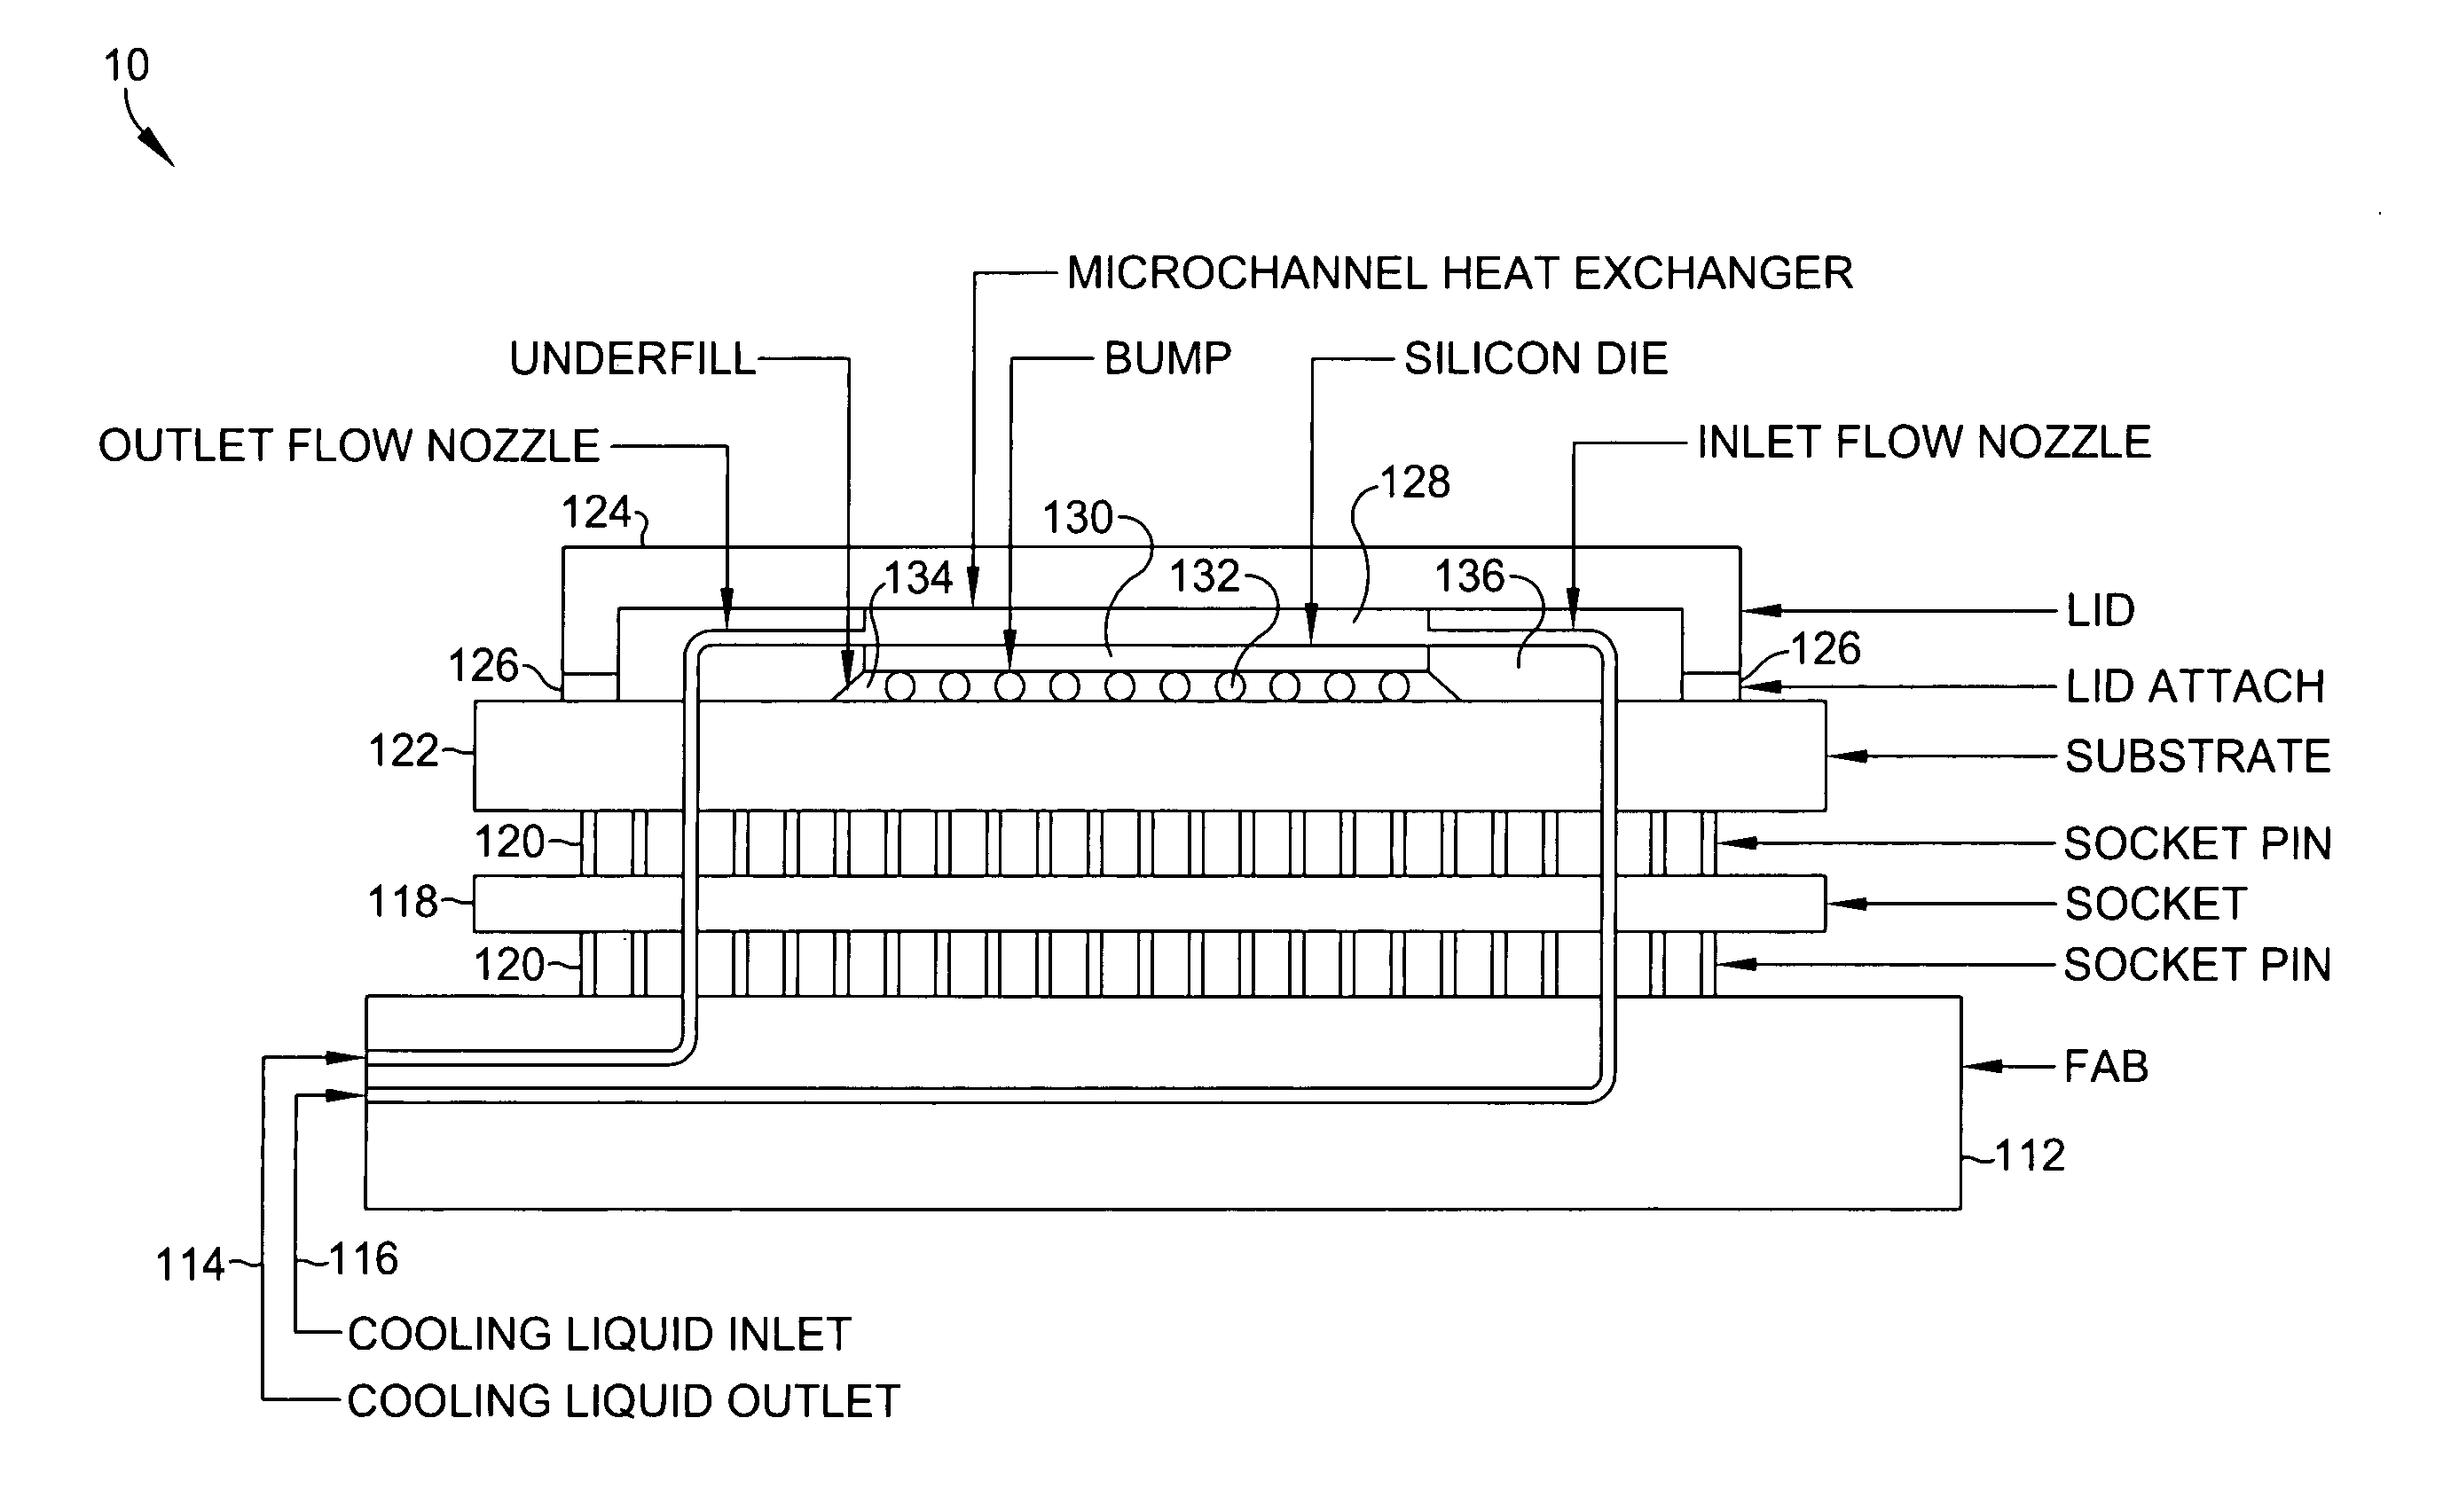 Embedded microchannel cooling package for a central processor unit